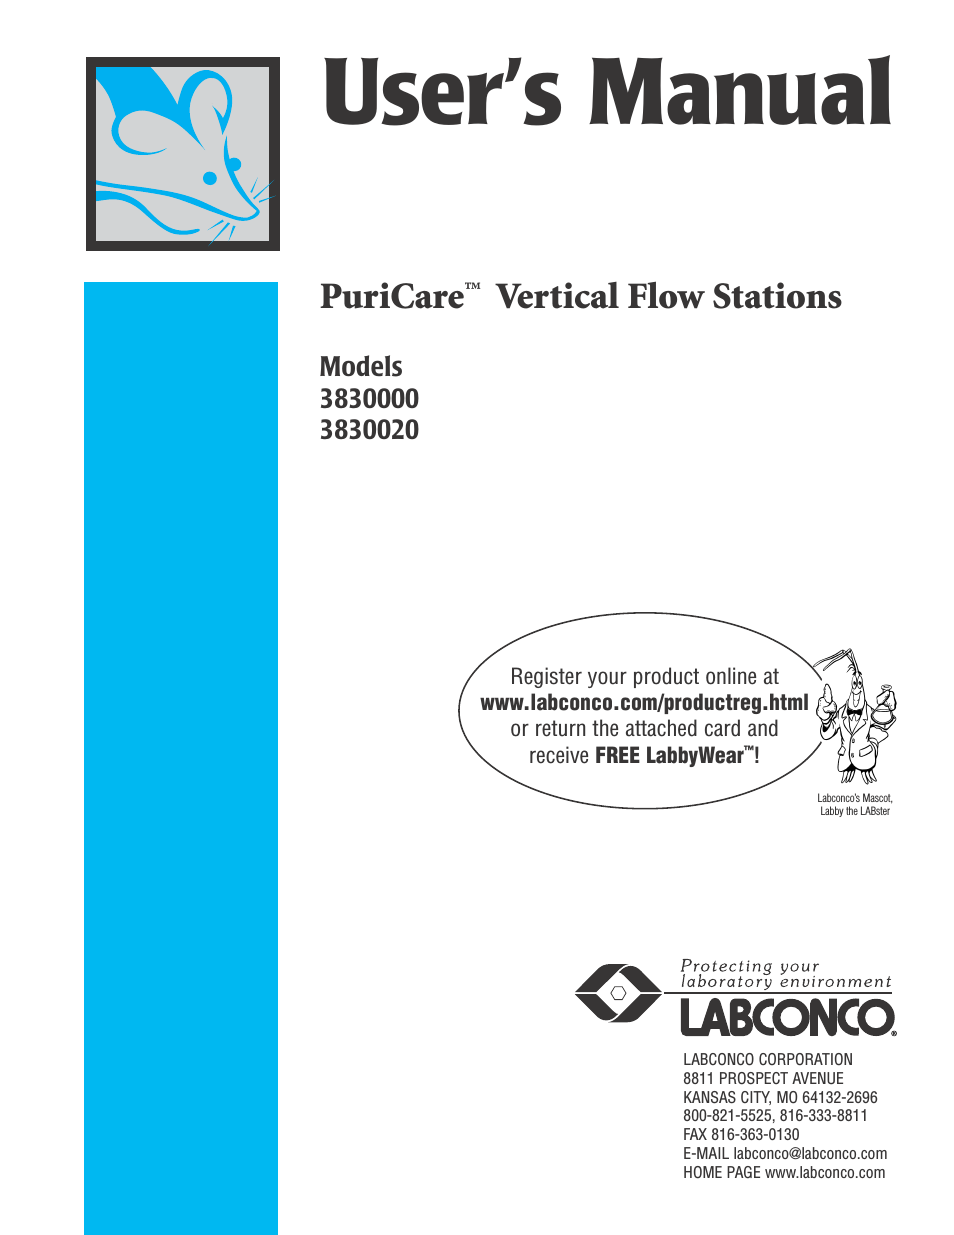 PuriCare Vertical Flow Stations 3830020